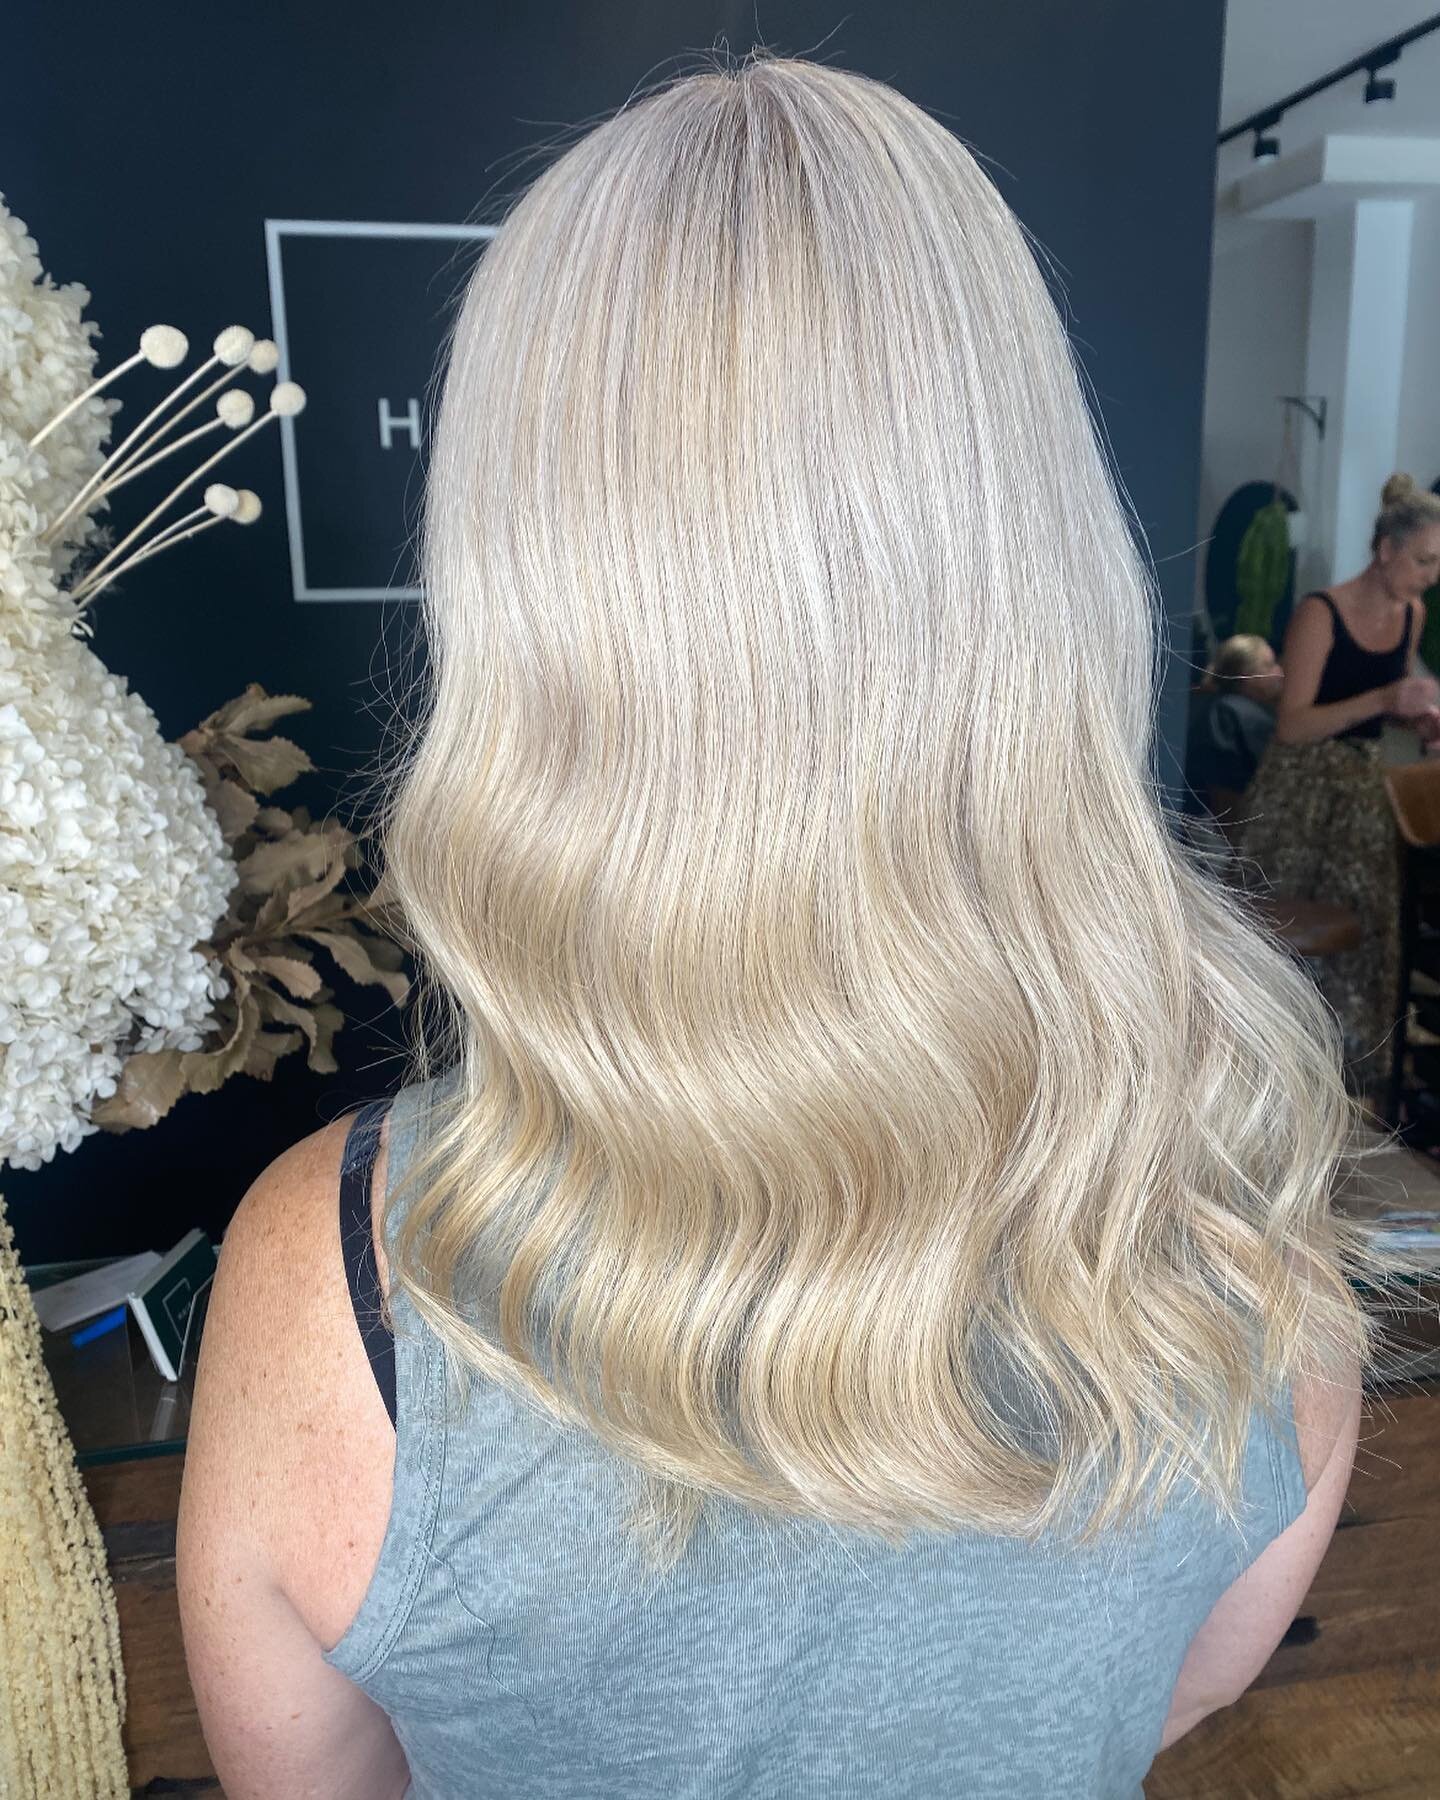 C O O L blonde ❄️❄️❄️ swipe 👉 for before .  This gorgeous client is transitioning from tint to foils - and it looks like it's done the trick ! No more brassy tones 🙅&zwj;♀️#hairfieldssalon #kirraweesalon #coolblonde #tinttofoils #keunecolor